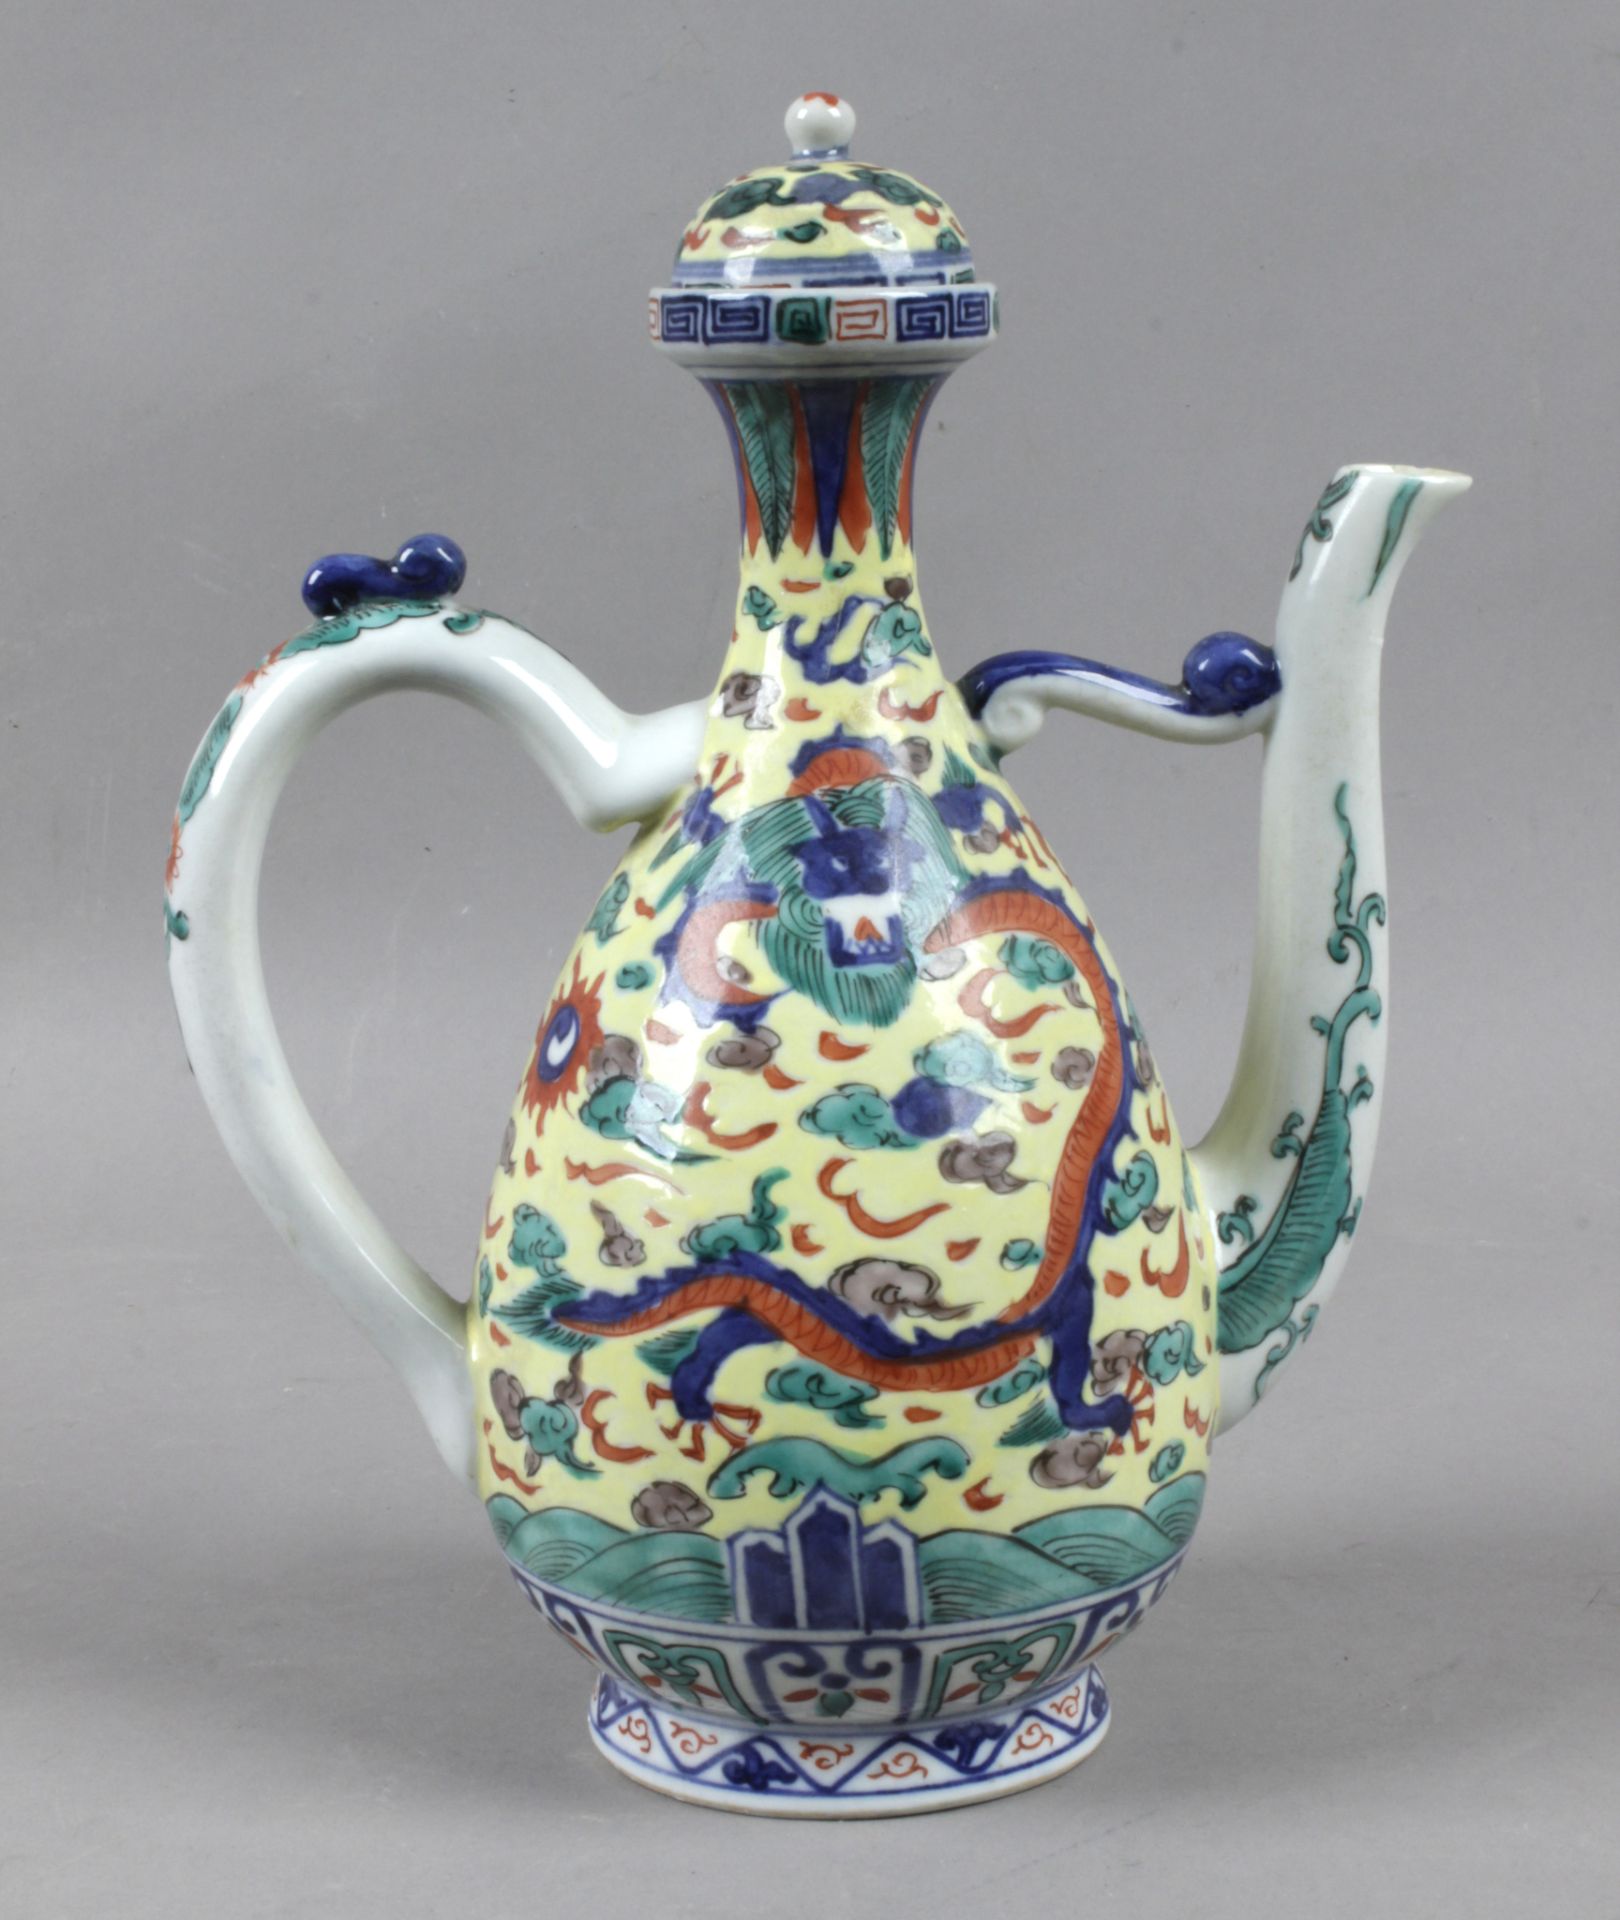 A 20th century Chinese porcelain teapot for the Turkish or Iranian trade